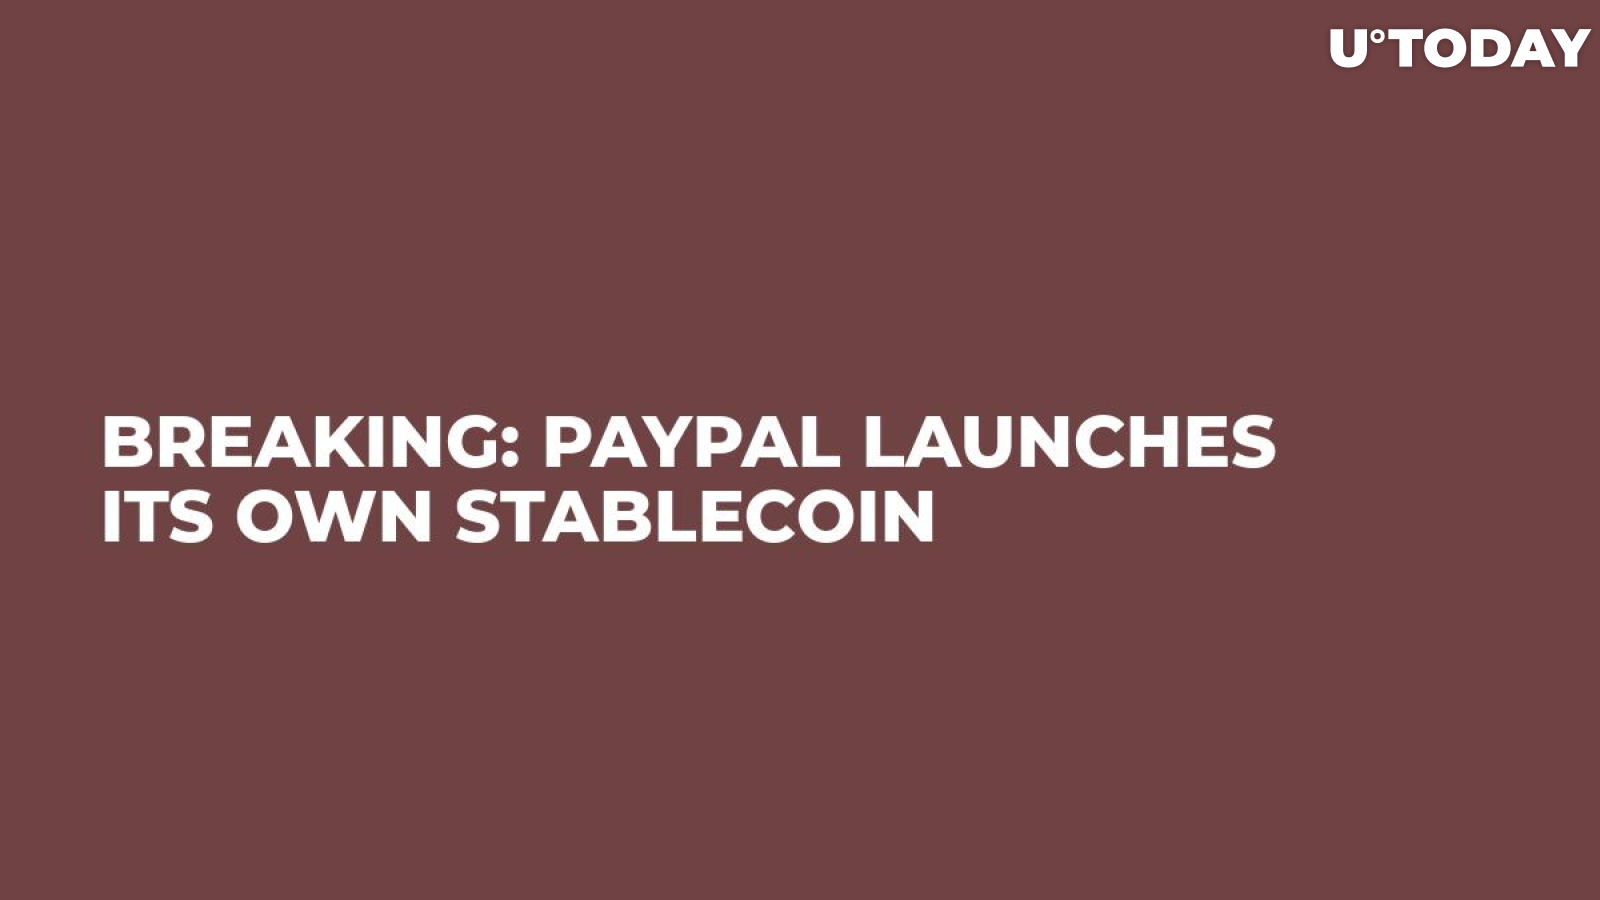 Breaking: PayPal Launches Its Own Stablecoin